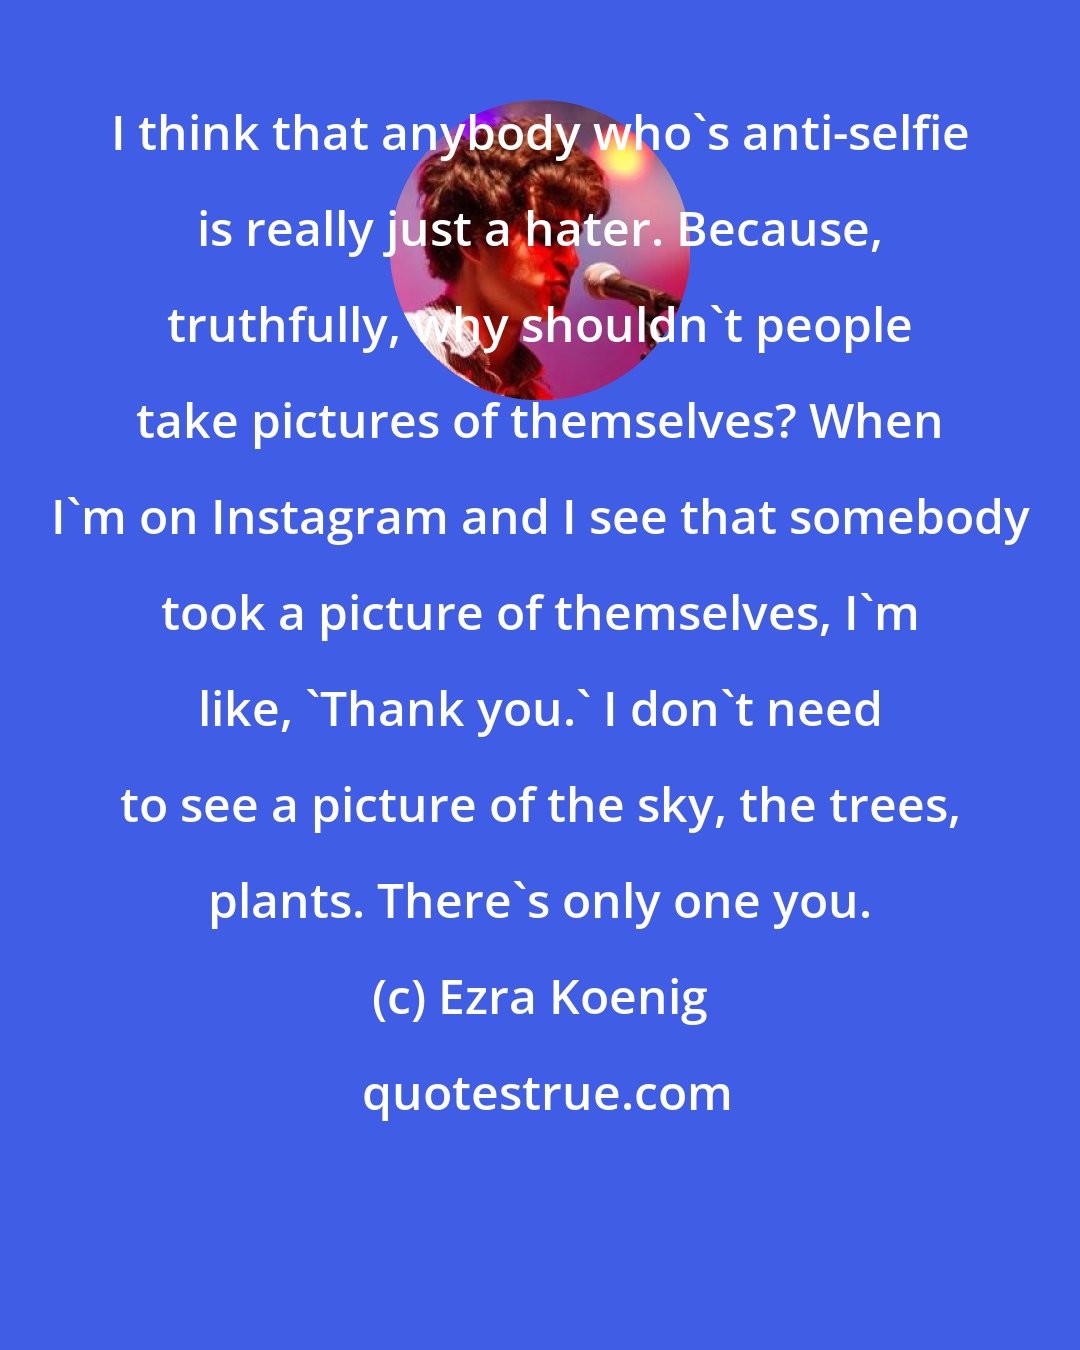 Ezra Koenig: I think that anybody who's anti-selfie is really just a hater. Because, truthfully, why shouldn't people take pictures of themselves? When I'm on Instagram and I see that somebody took a picture of themselves, I'm like, 'Thank you.' I don't need to see a picture of the sky, the trees, plants. There's only one you.